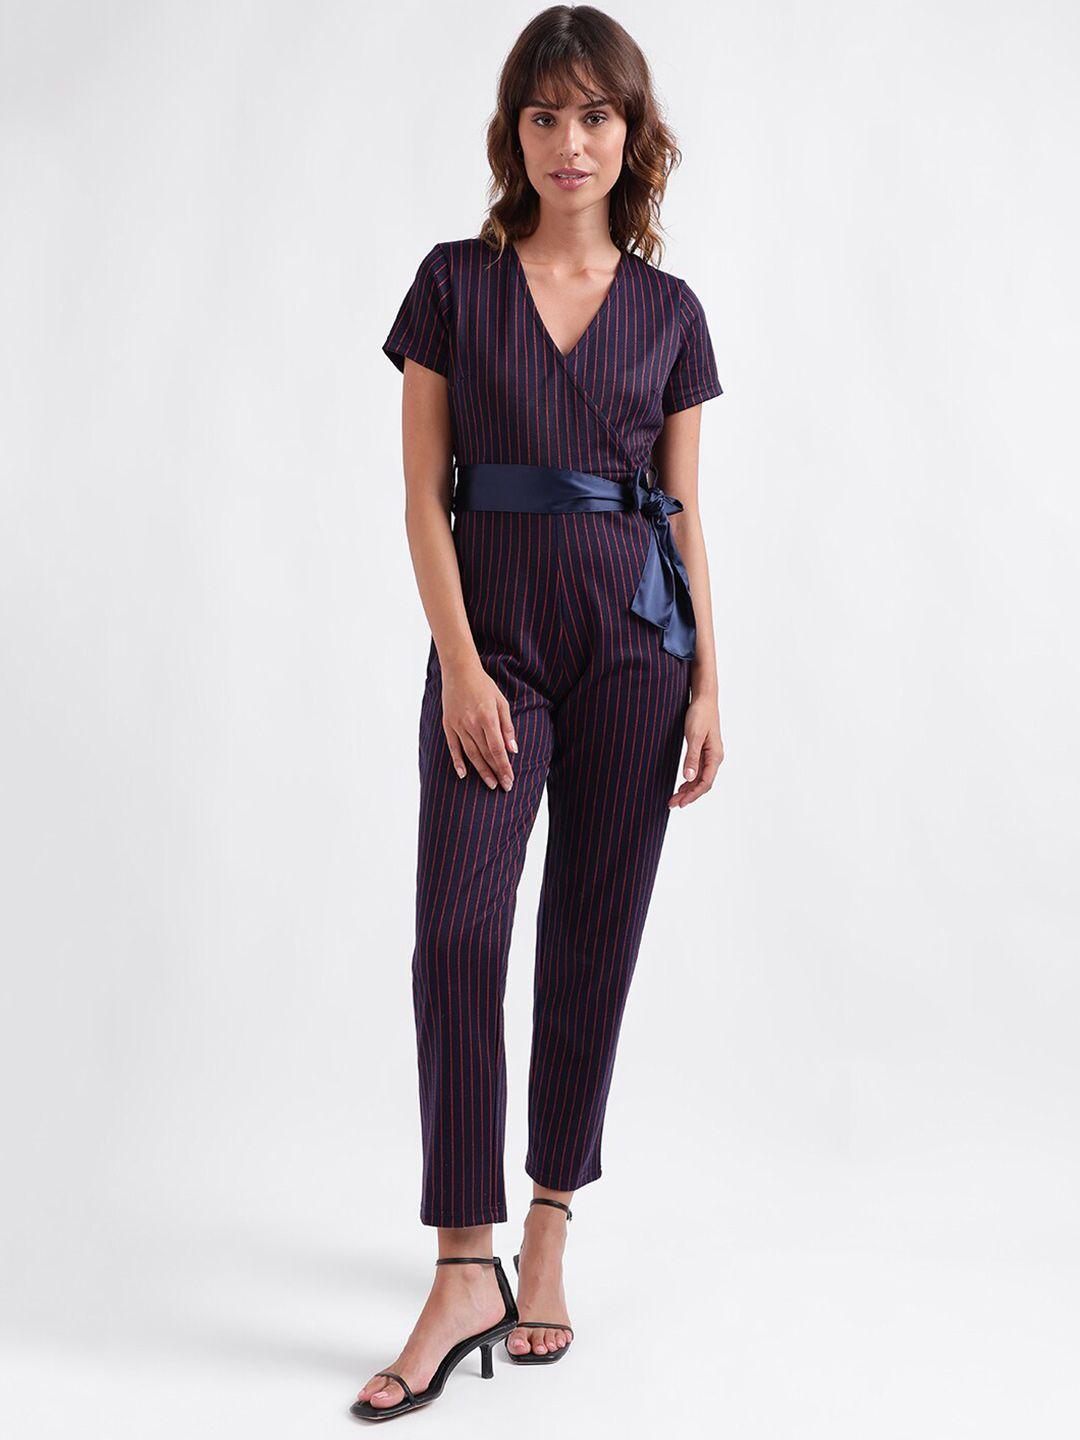 iconic navy blue & red striped v-neck tie-up basic jumpsuit